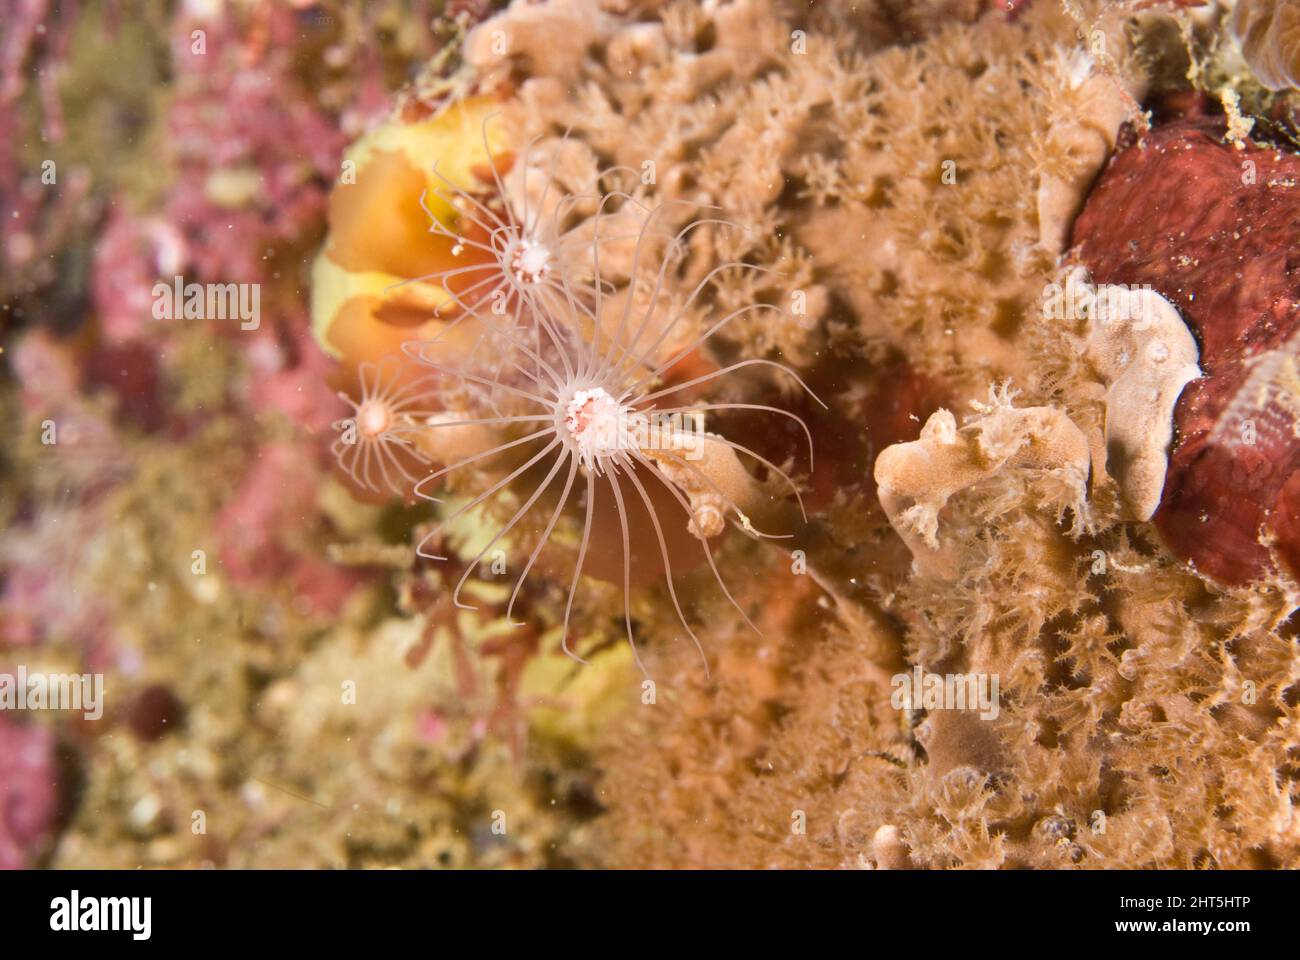 Stalked or Solitary hydroid (Tubularia raphi). Hydroids have a circle of stinging tentacles surrounding their mouths. Stock Photo